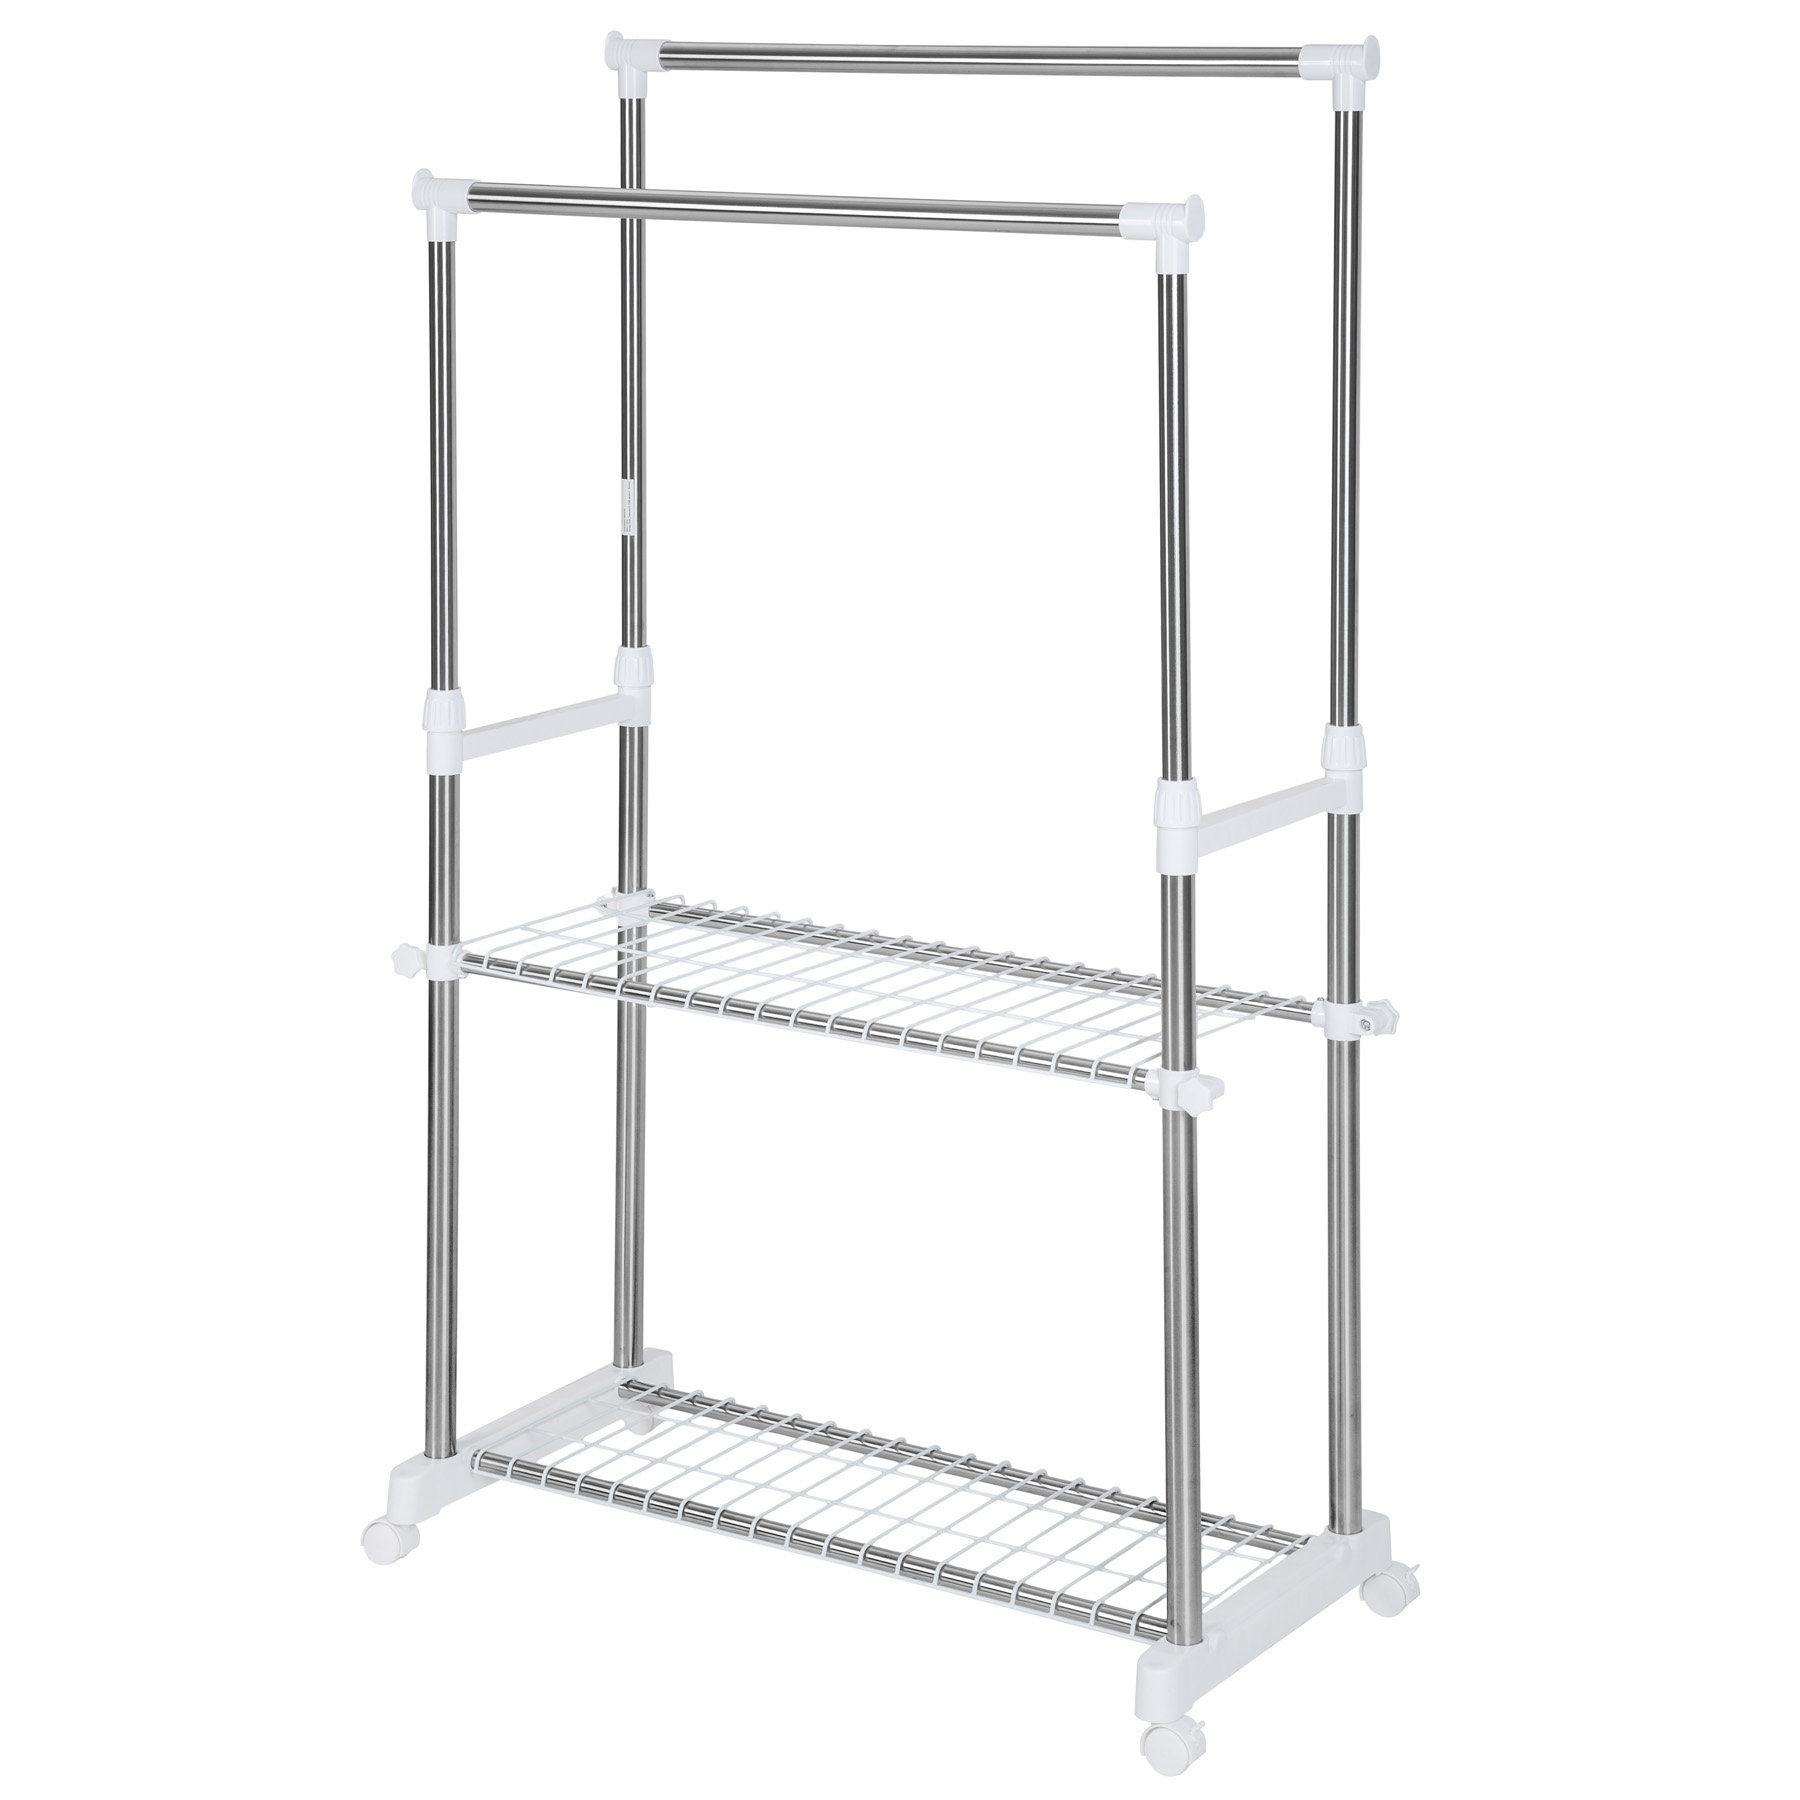 tectake Clothes rack 84x42x170 cm - clothes stand, clothes rail, clothes hanger stand - grey